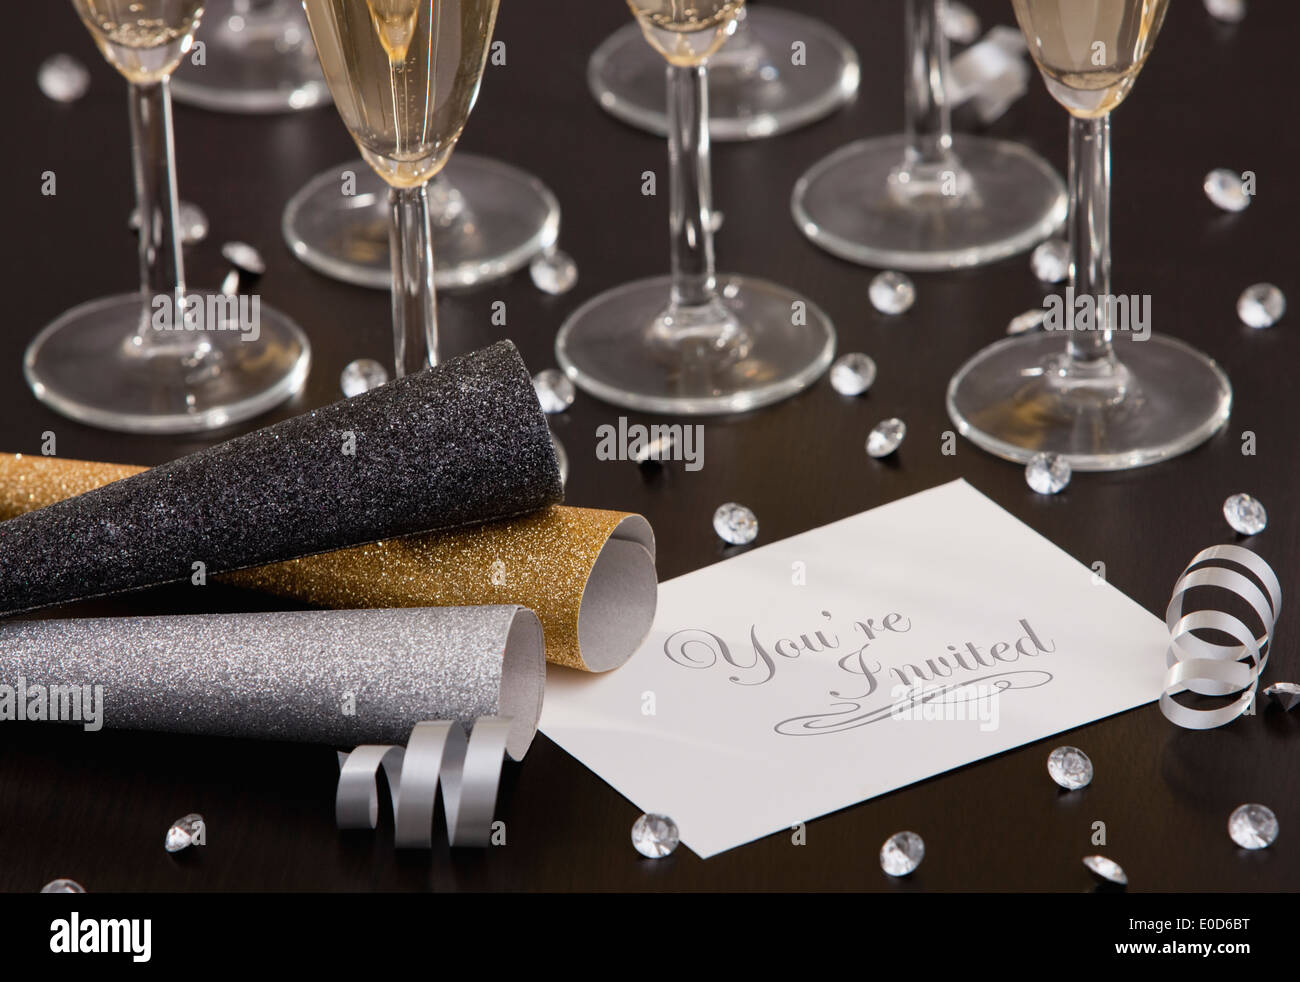 Invitation and champagne flutes on table Stock Photo